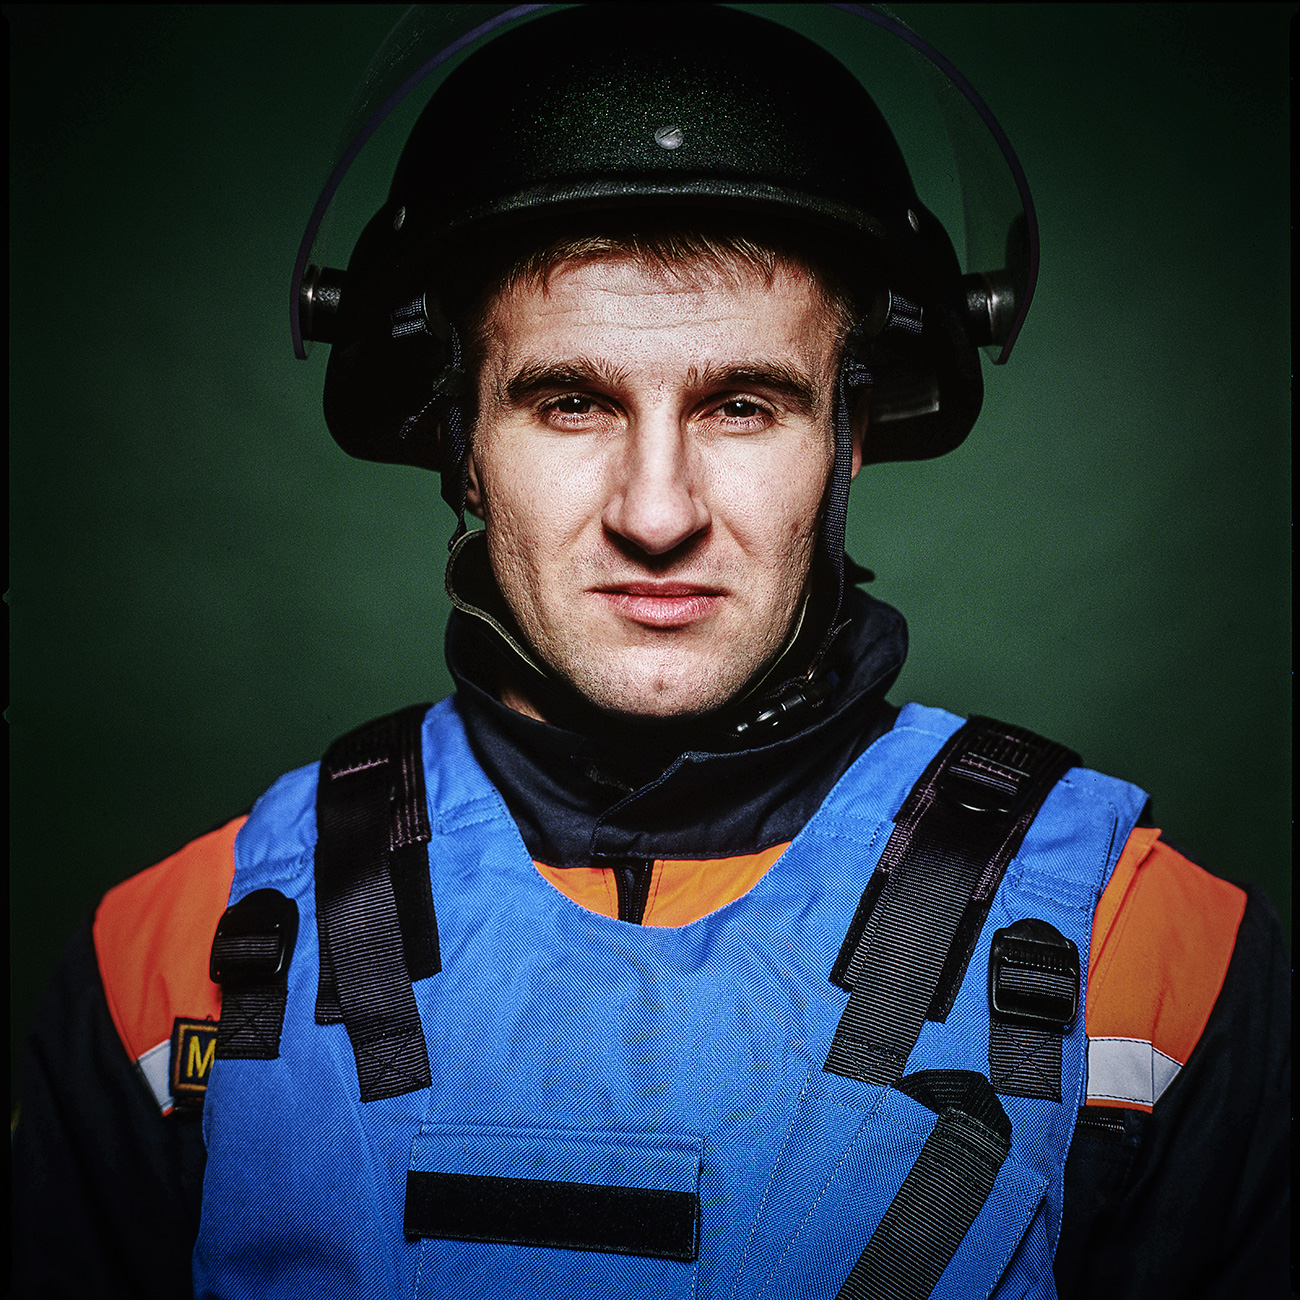 Professional rescuer Maxim Chernenkov chose the hard and dangerous job of a pyrotechnist. Risking his life, Chernenkov has to deal with explosives, mines and unexploded shells from the time of World War II.Chernenkov worked at Domodedovo Airport after the 2011 terror act, and cleared Crimea from dangerous explosive items, including the famous Kerch Fortress.Maxim recalls how he was once at death’s door. During a fire in a warehouse in Serbia in the early 2010s, a heavy object fell on a mine, shattering its detonator. The mine should have exploded, but fortunately did not. Maxim felt like he had been born a second time.